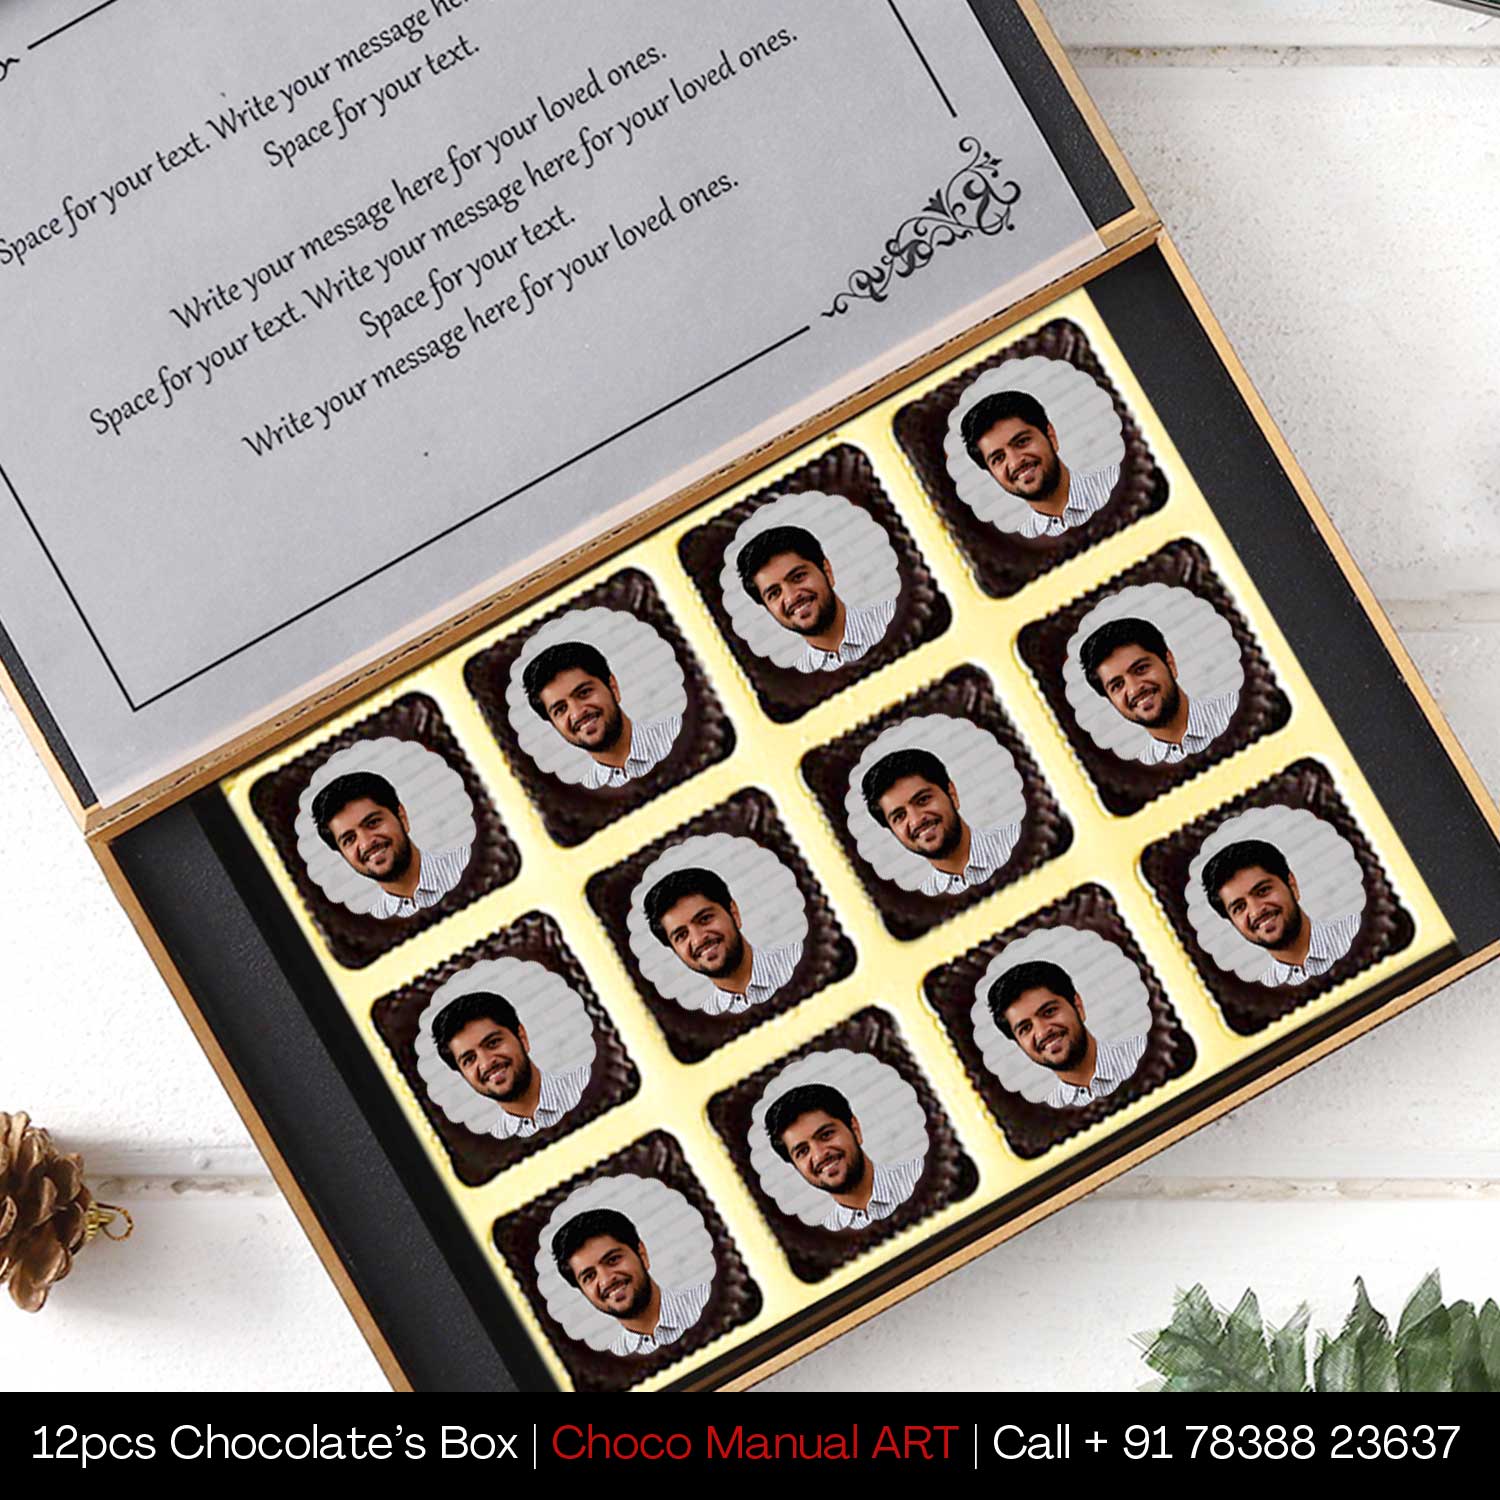 Premium Customised Chocolate Gifts for Thank you - Choco ManualART